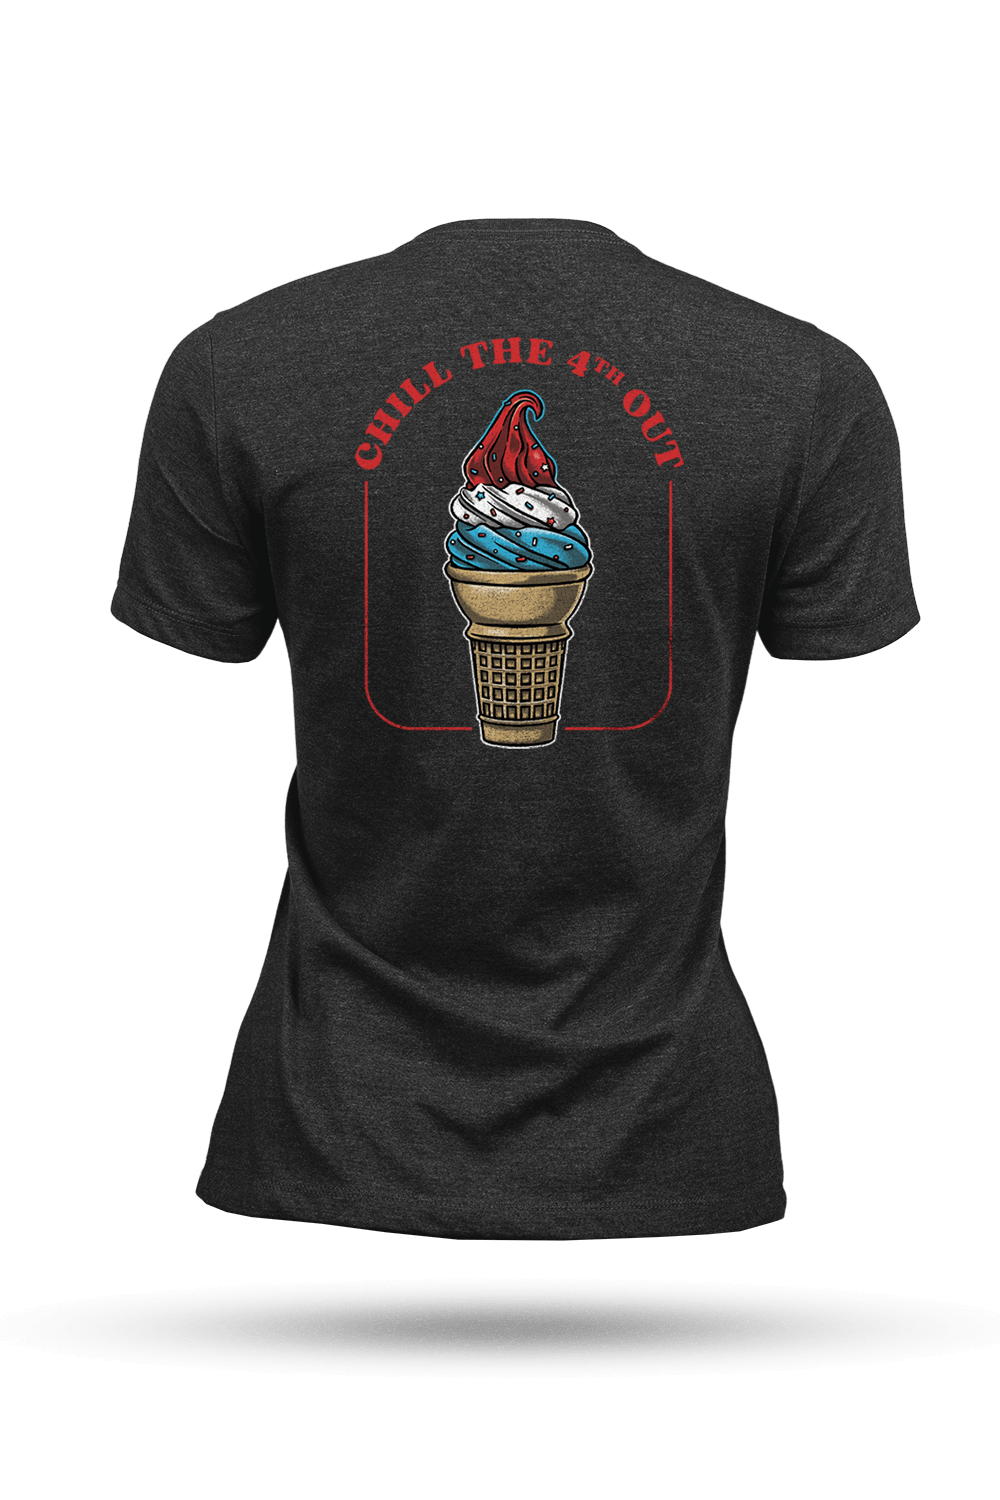 Women's T - Shirt - Chill the 4th out